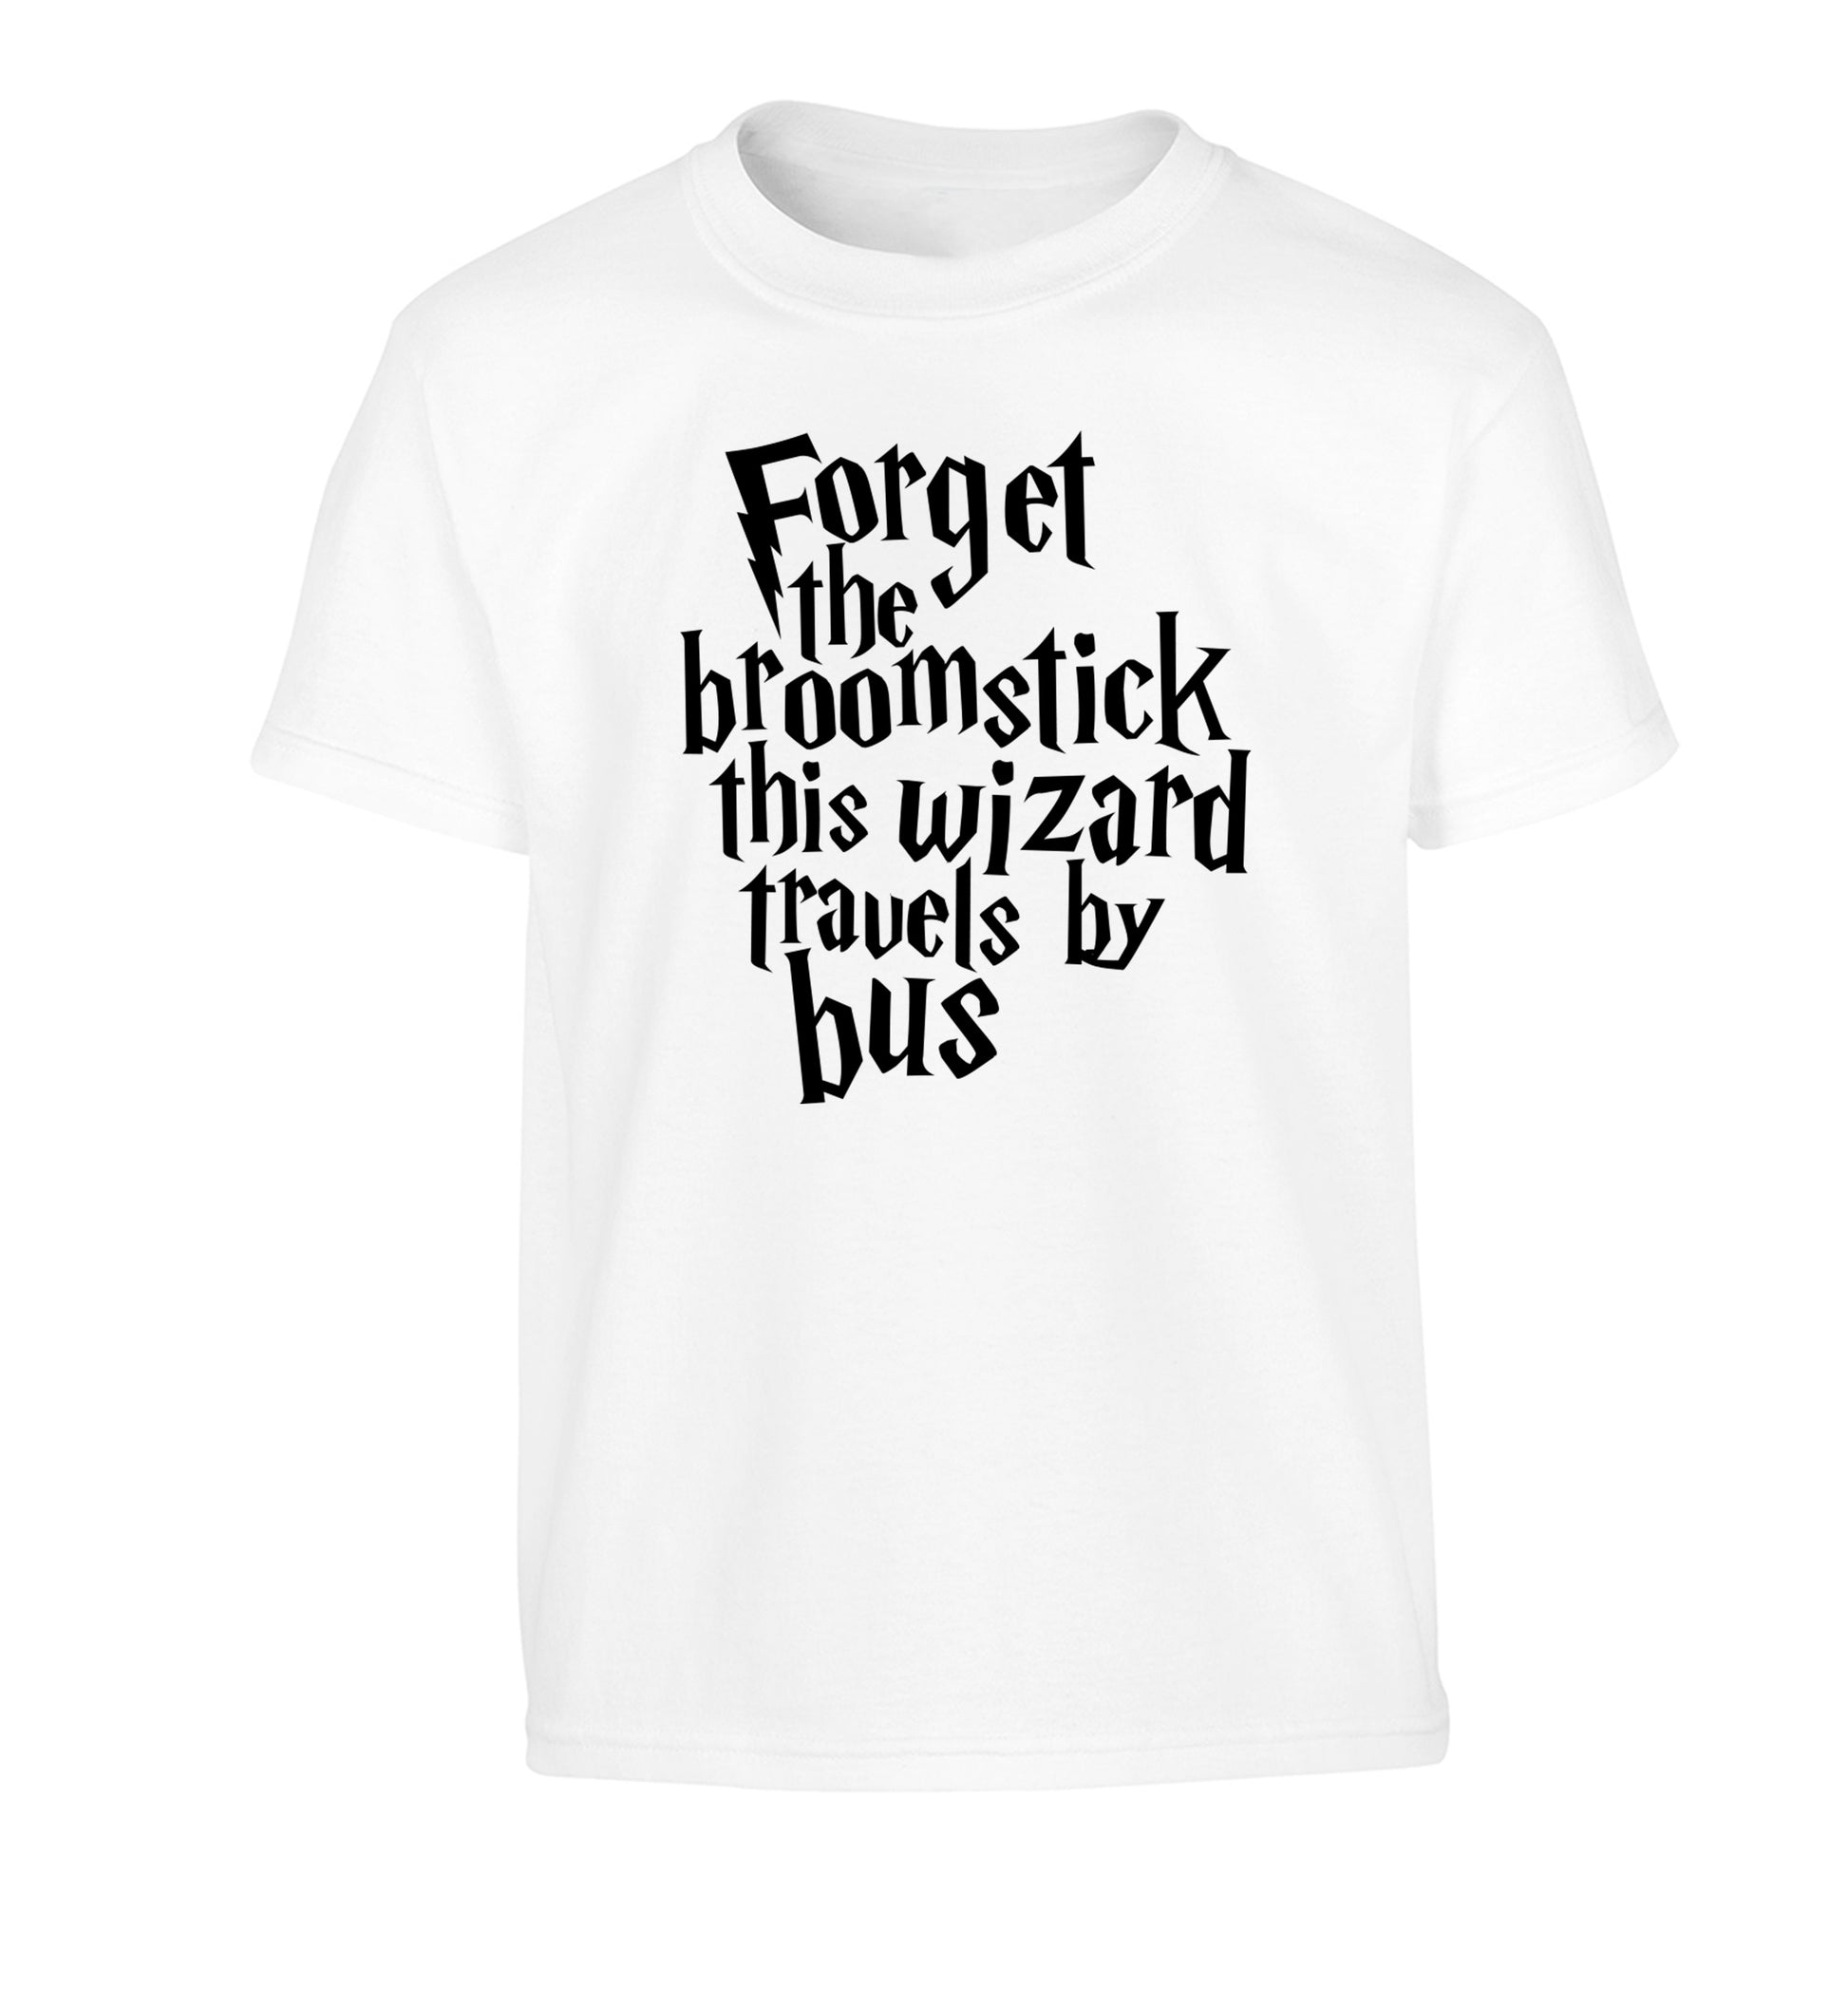 Forget the broomstick this wizard travels by bus Children's white Tshirt 12-14 Years